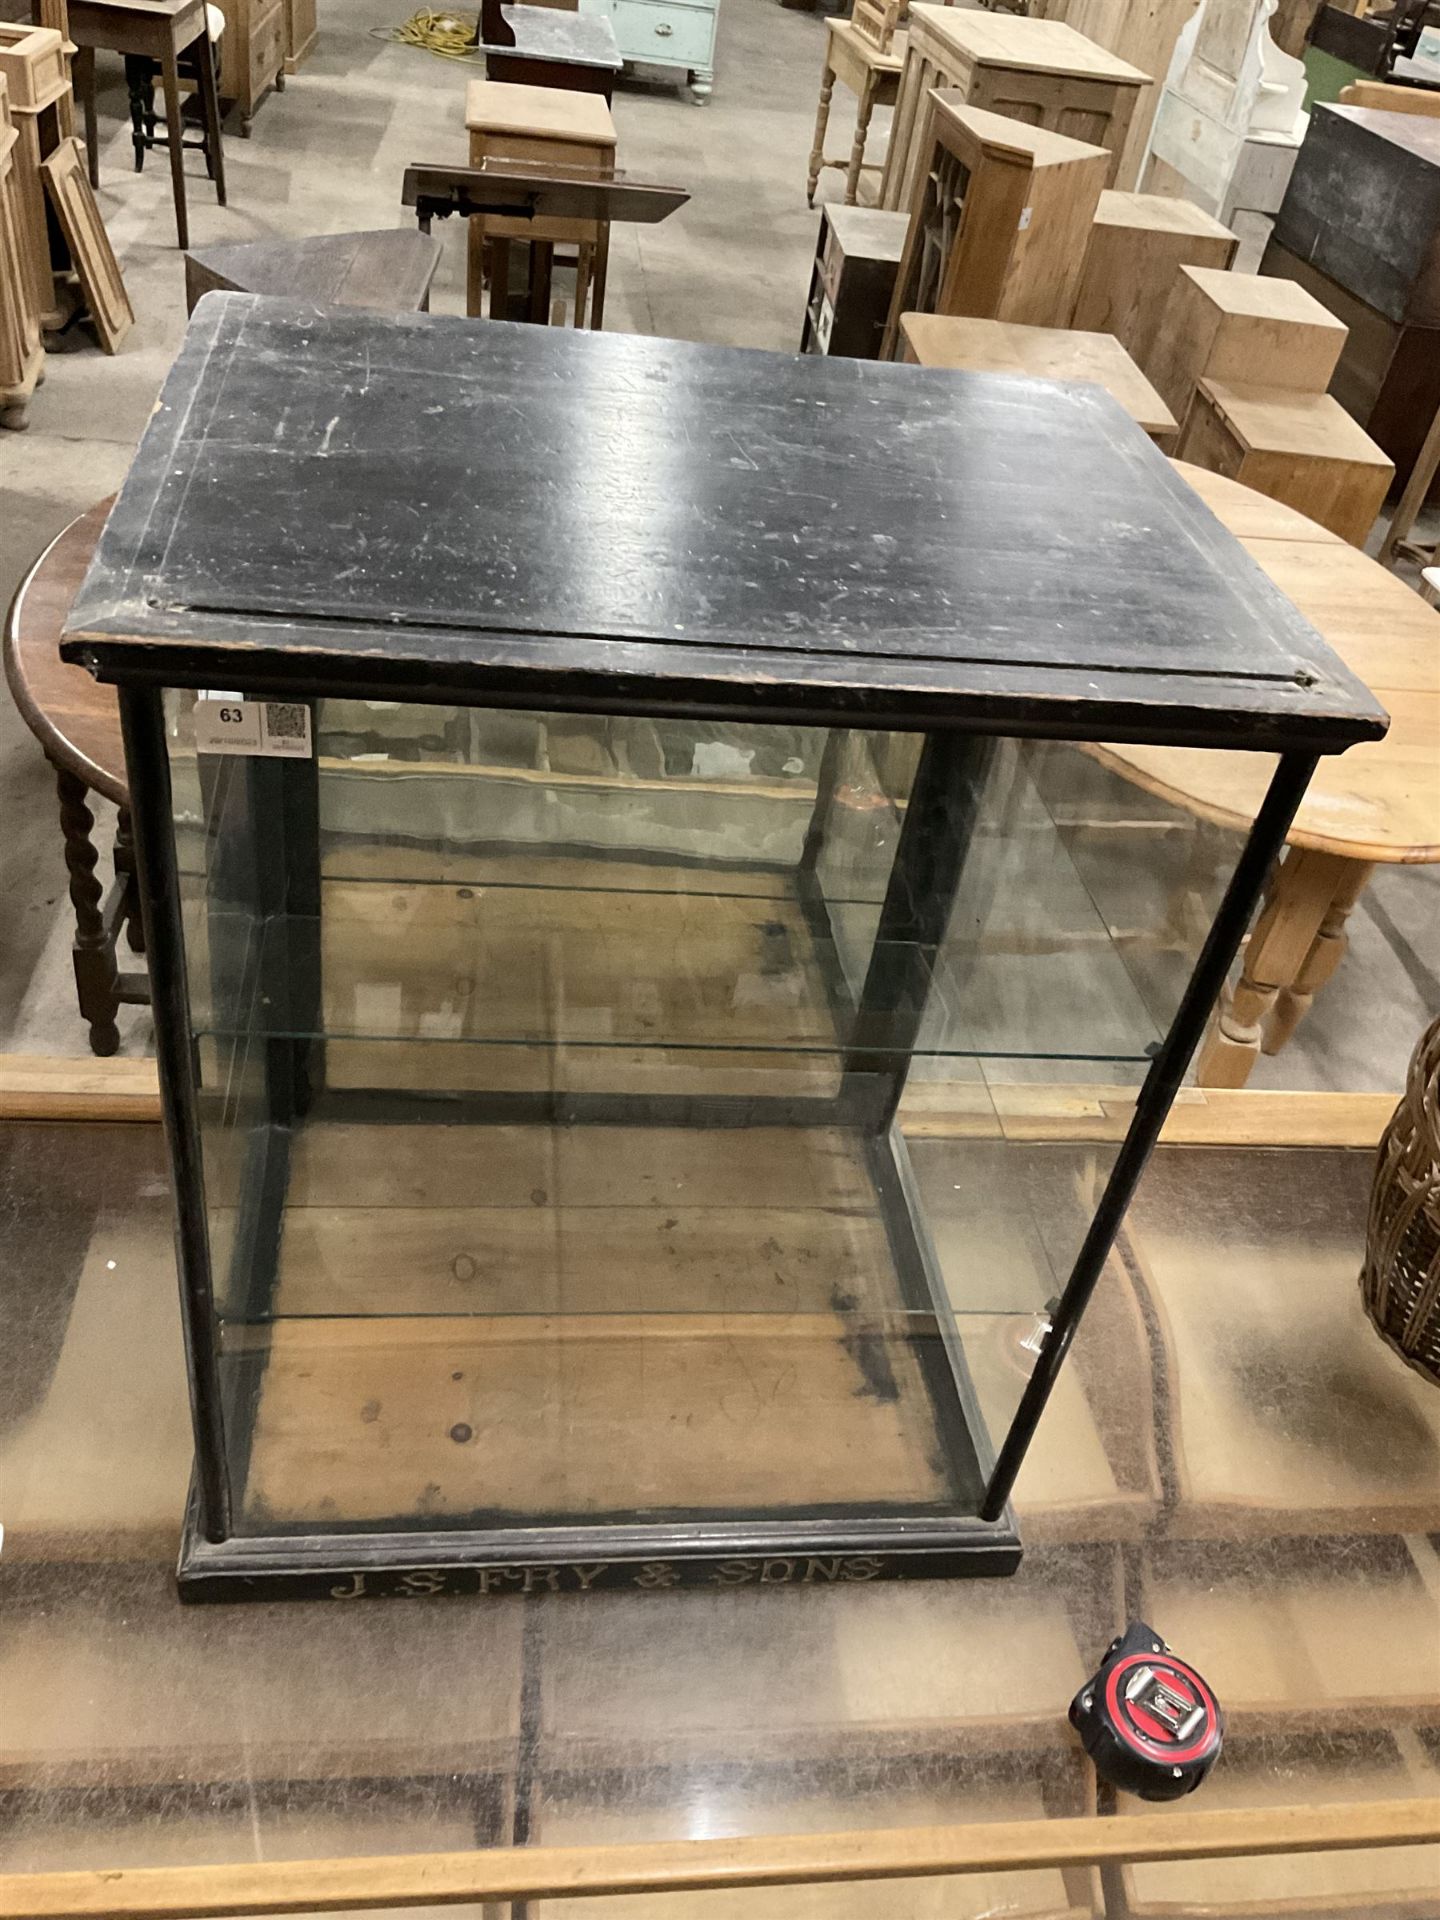 J S Fry & Sons - Victorian glazed and ebonised chocolate countertop display cabinet - Image 3 of 5